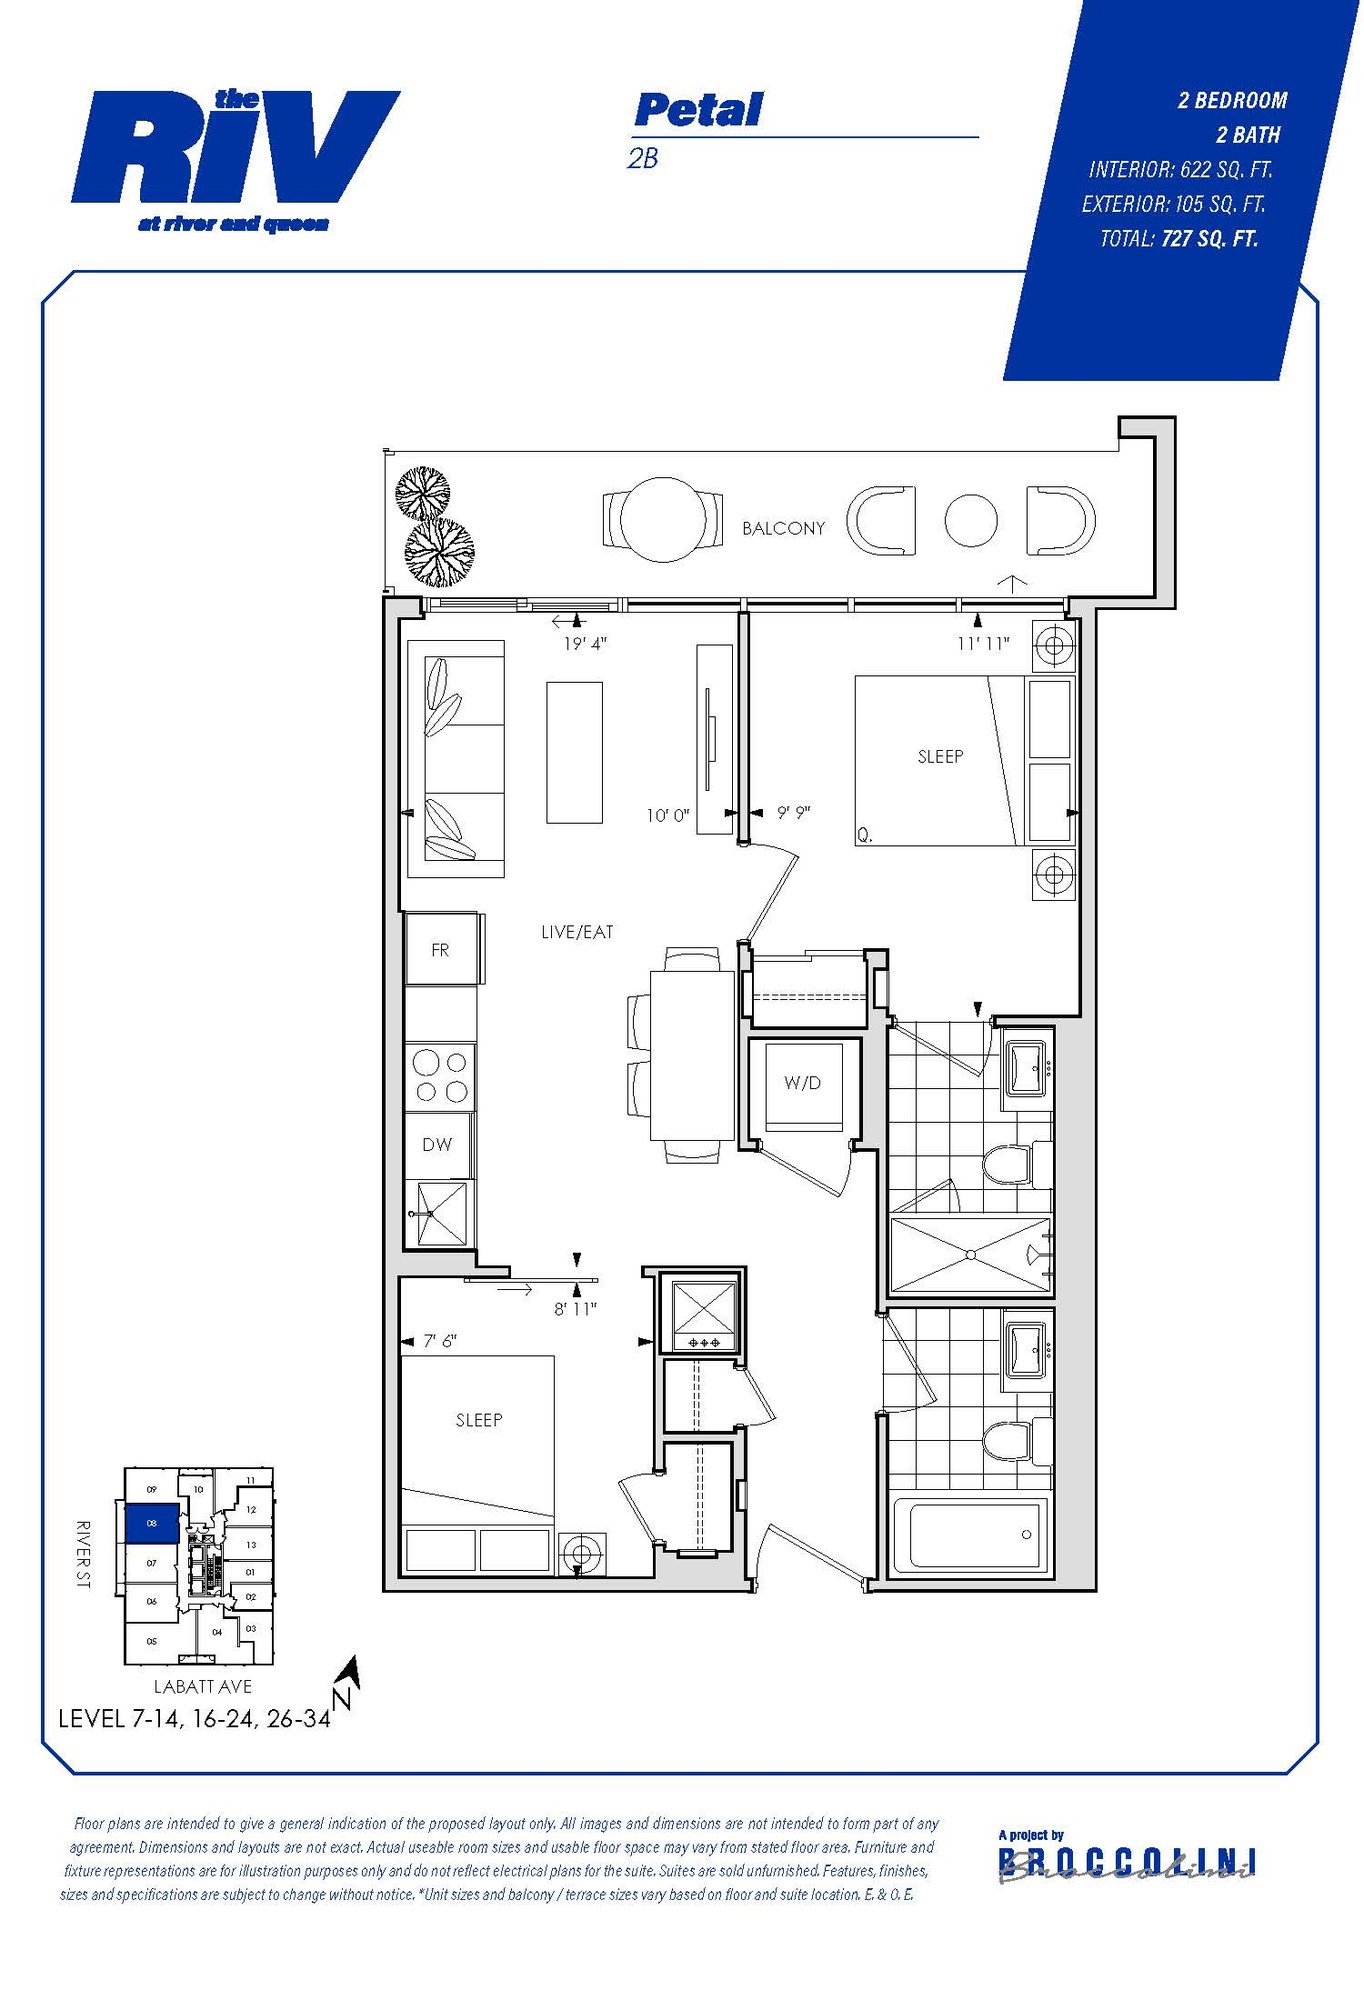 Floor plan for Petal two bedroom unit in The Riv